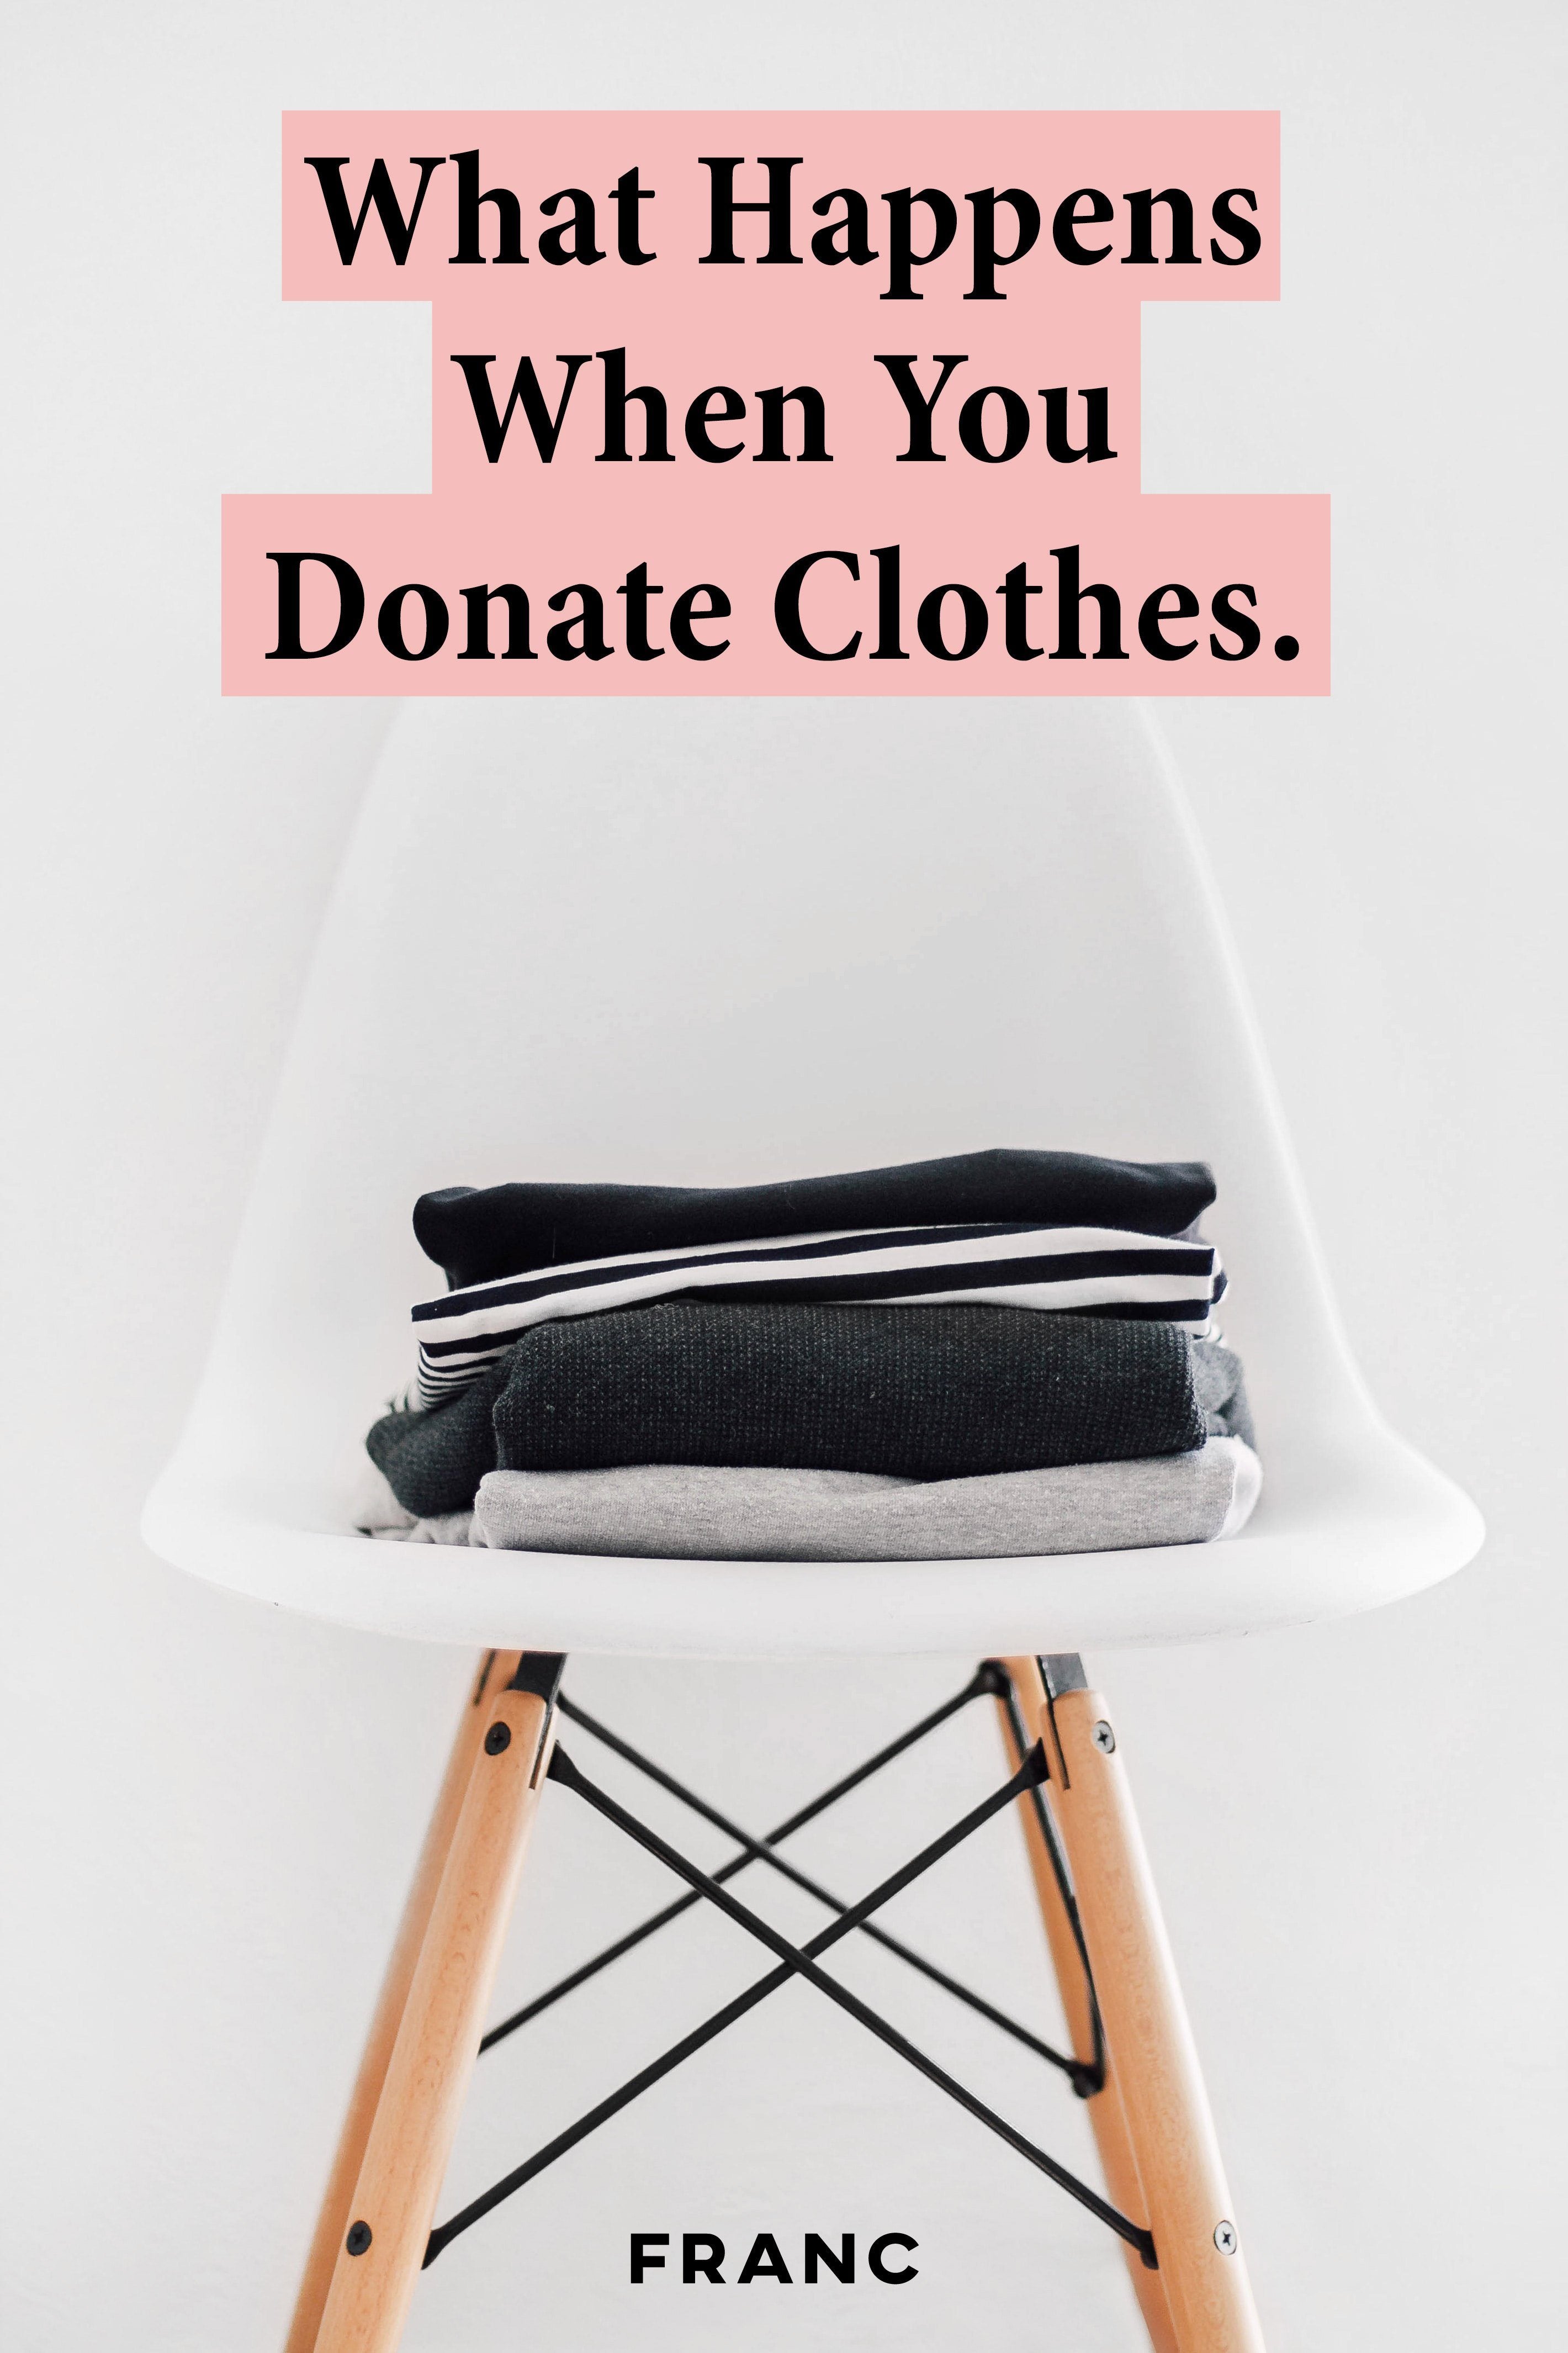 What Actually Happens When You Donate Clothes to a Thrift Store? - FRANC